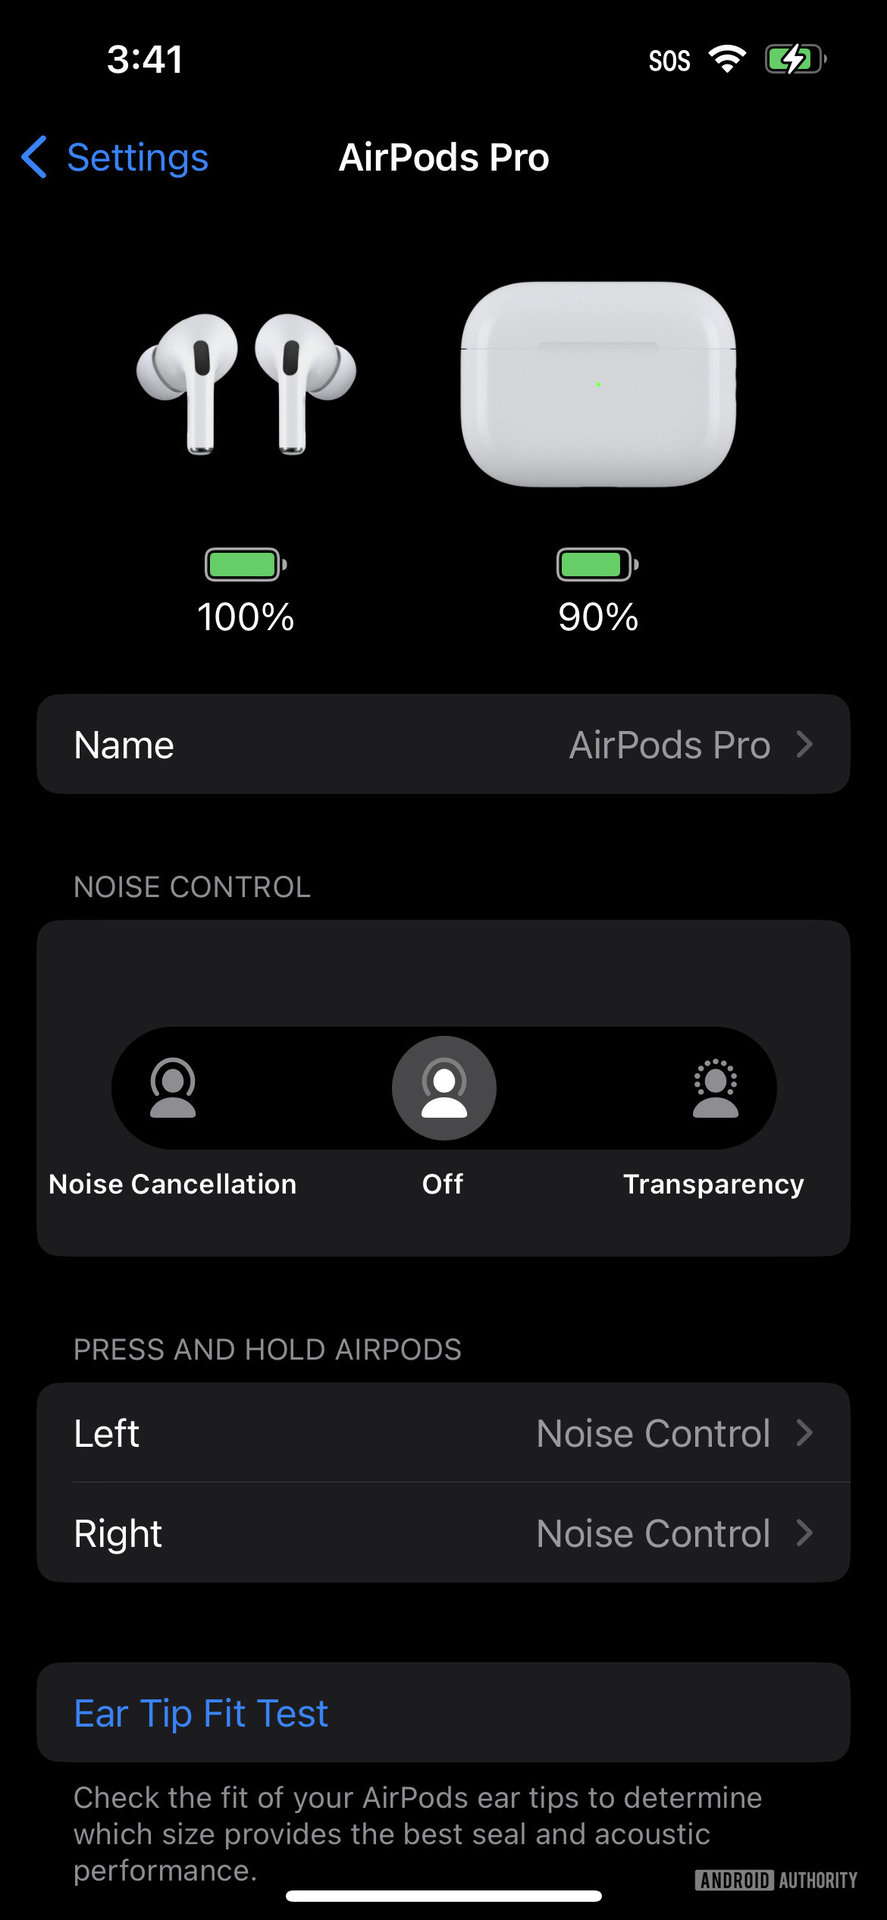 A screenshot of the AirPods Pro 2 settings page in the iPhone Settings app showing the top portion.